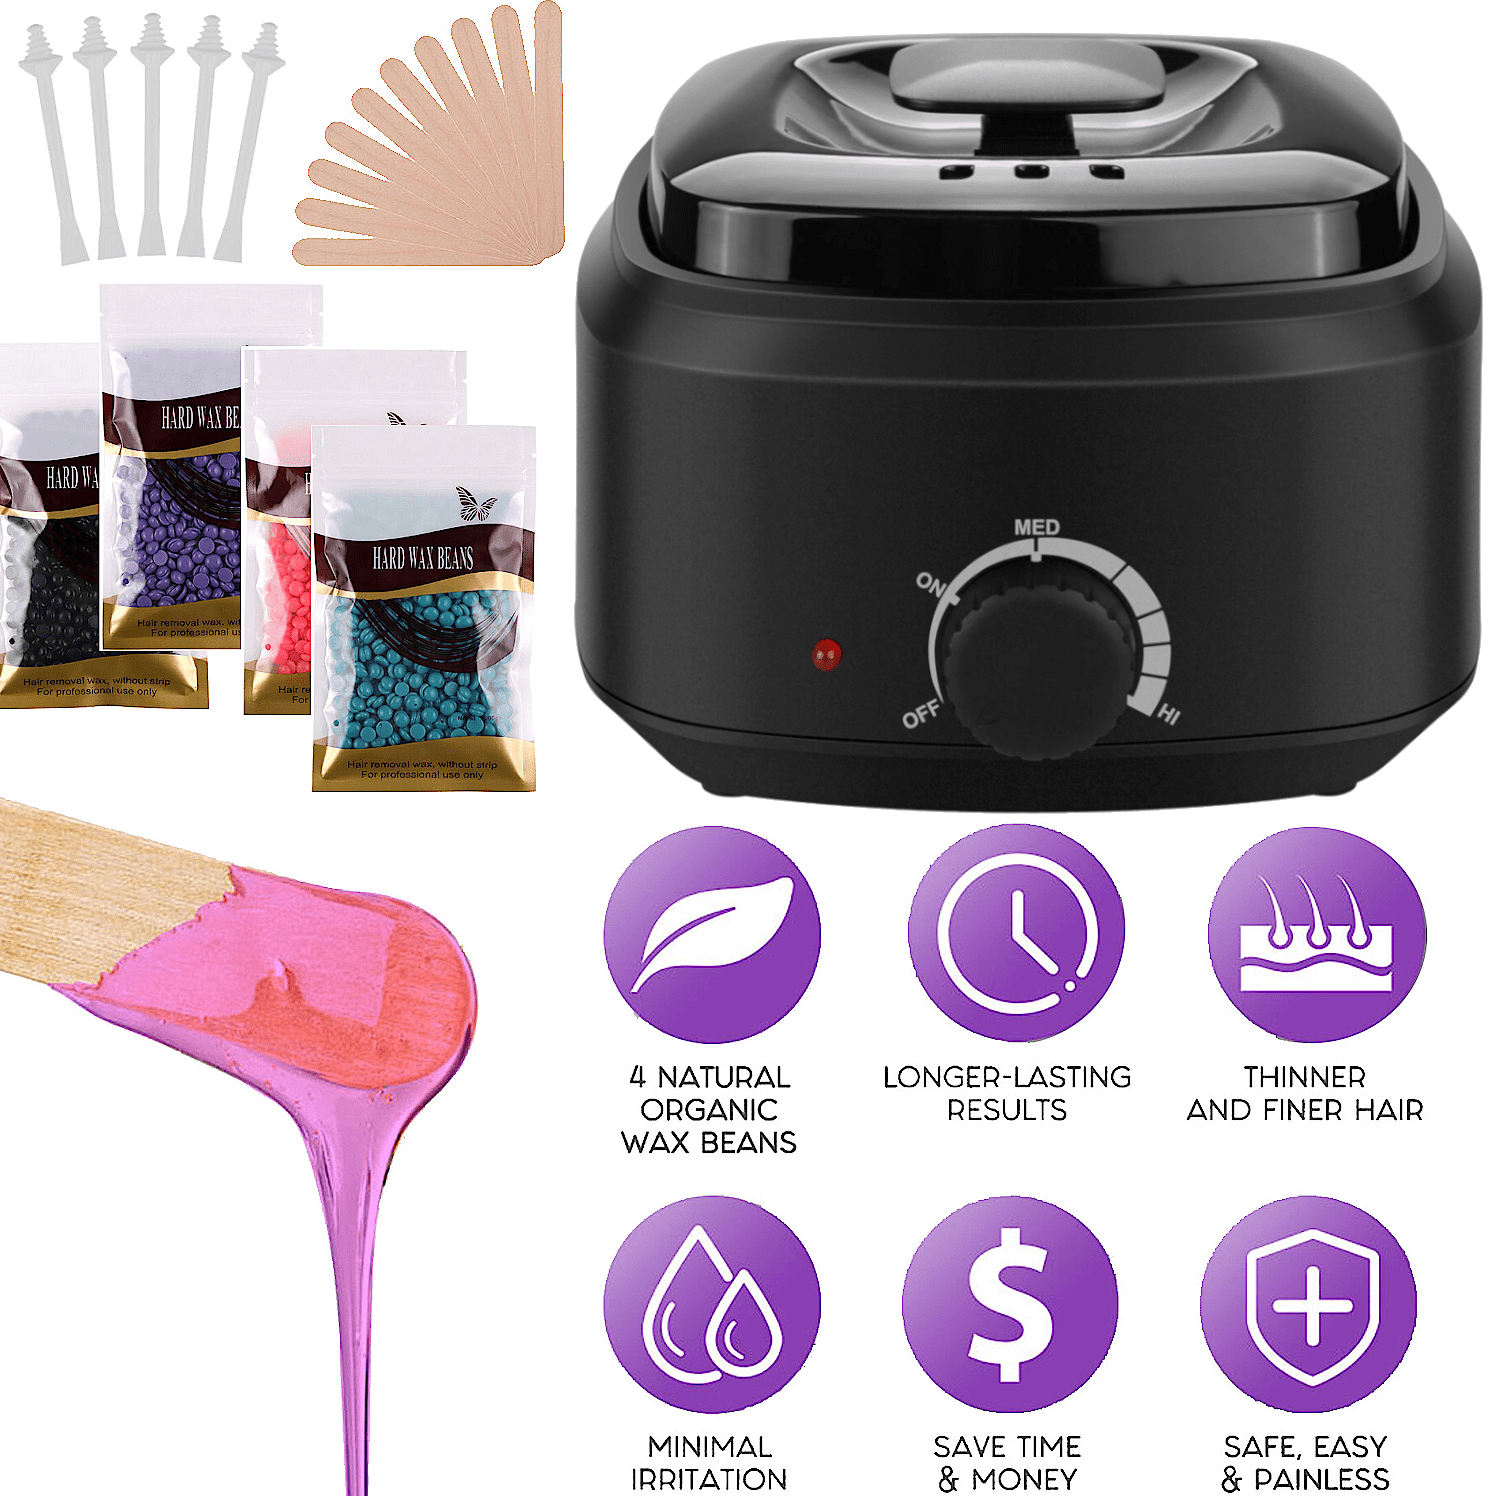 AGPTEK Waxing Kit for Women and Men, At Home Wax Warmer Hair Removal  Include 4Pack Wax Beans & 10x Waxing Sticks,Black 